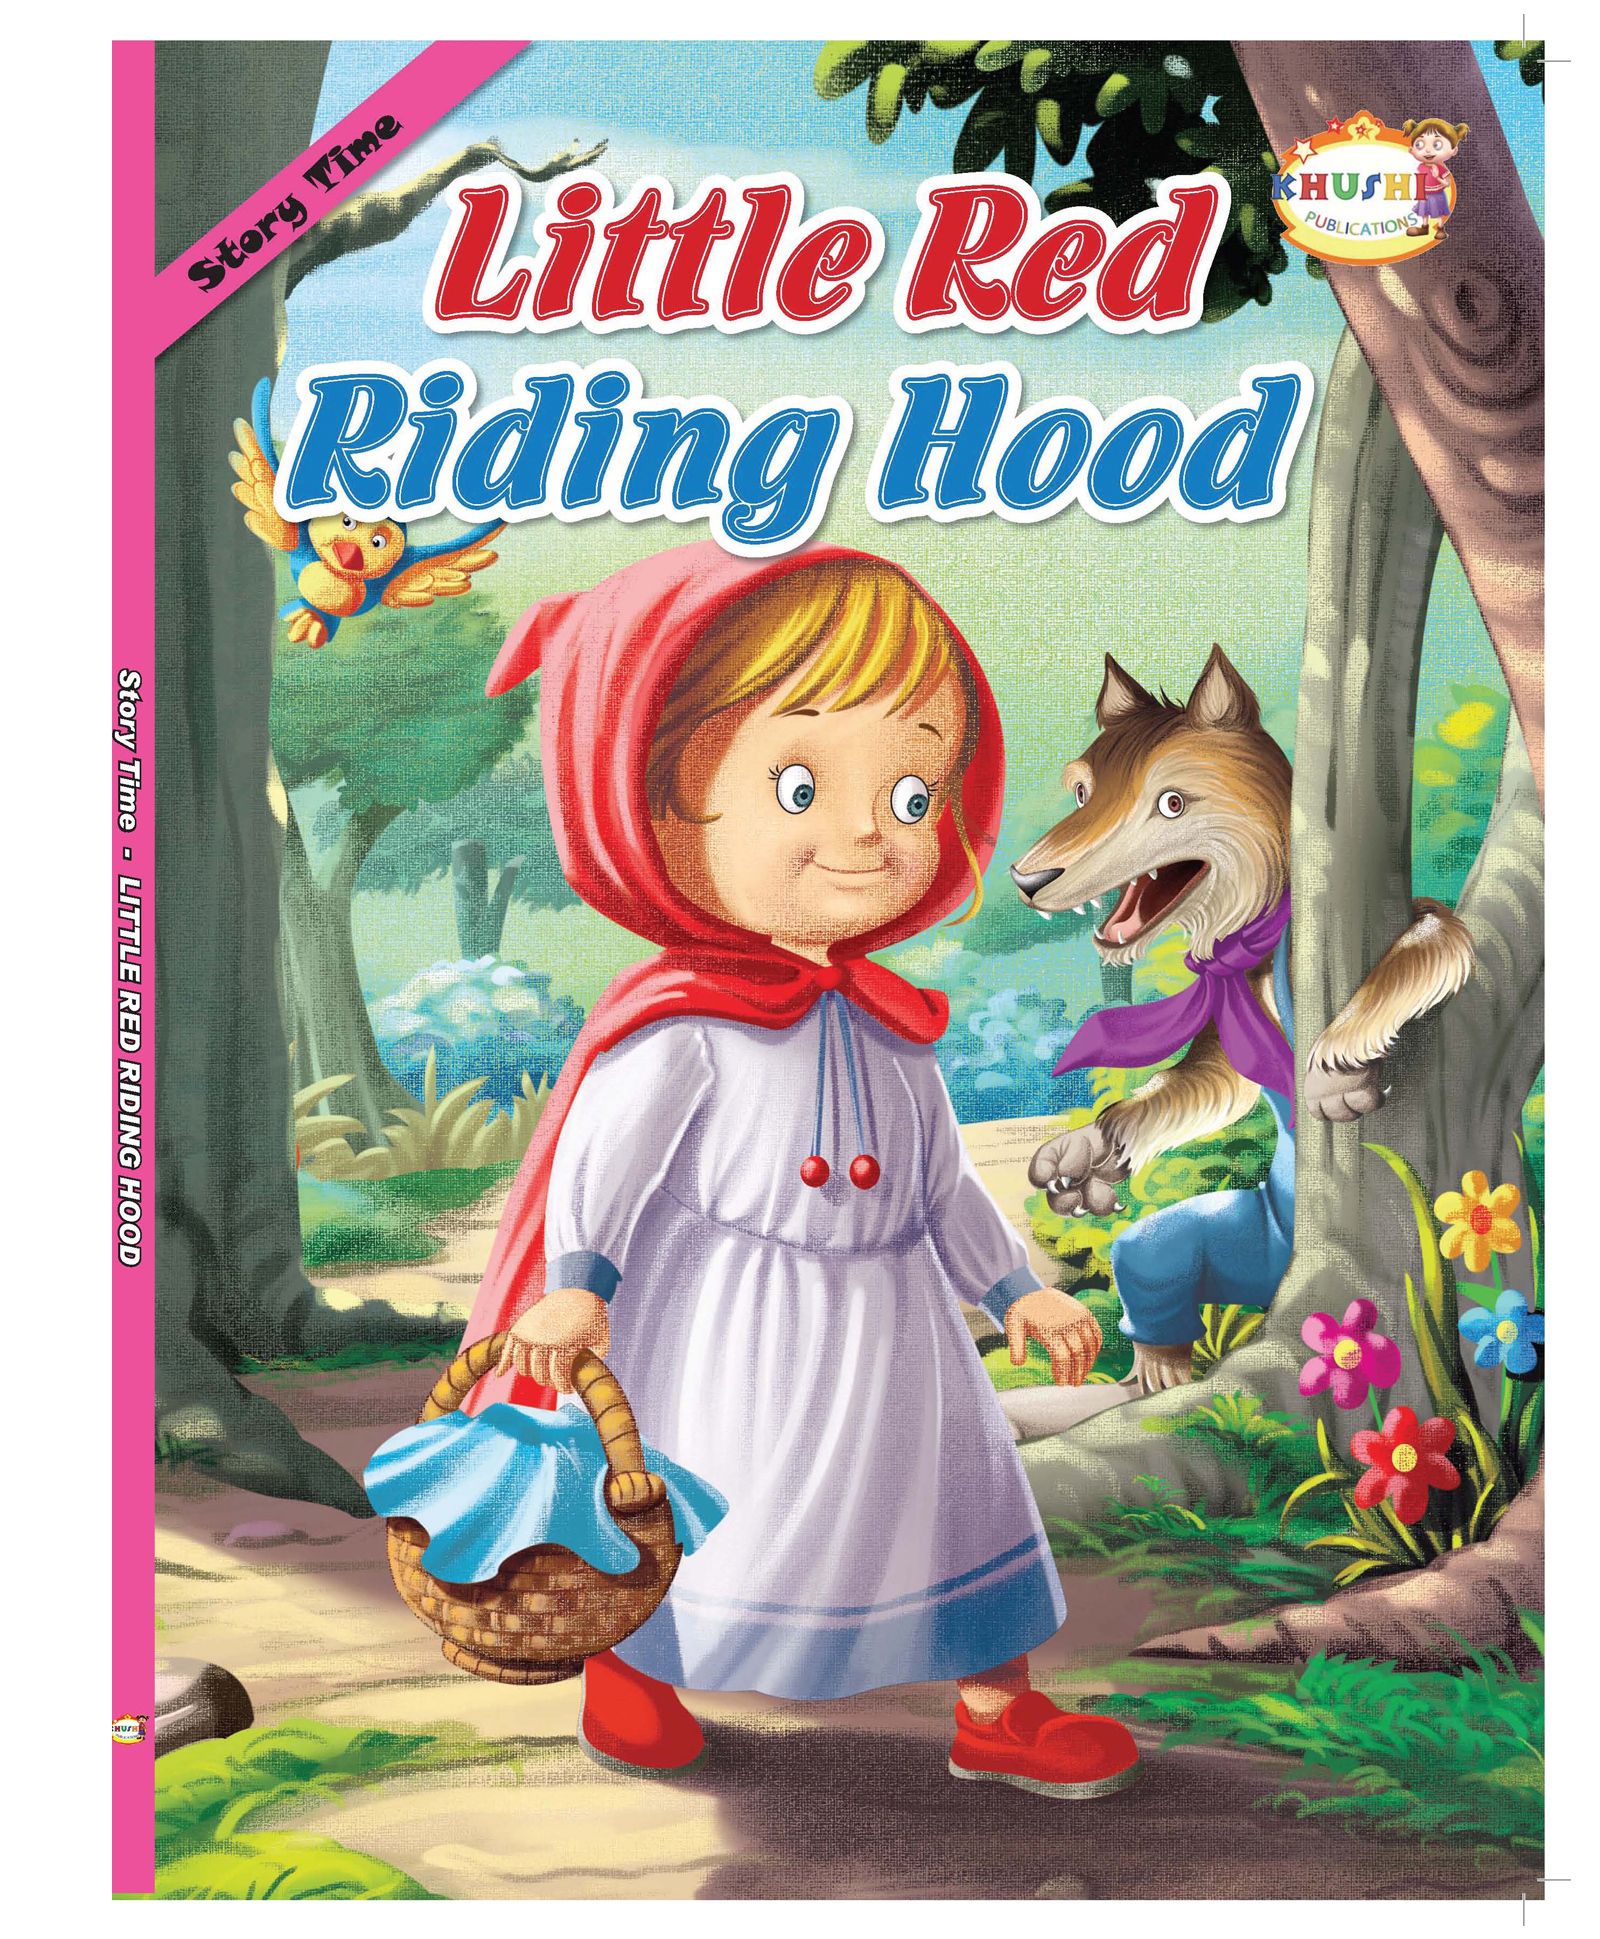 Little Red Riding Hood Story Book English Online In India Buy At Best Price From Firstcry Com 7546